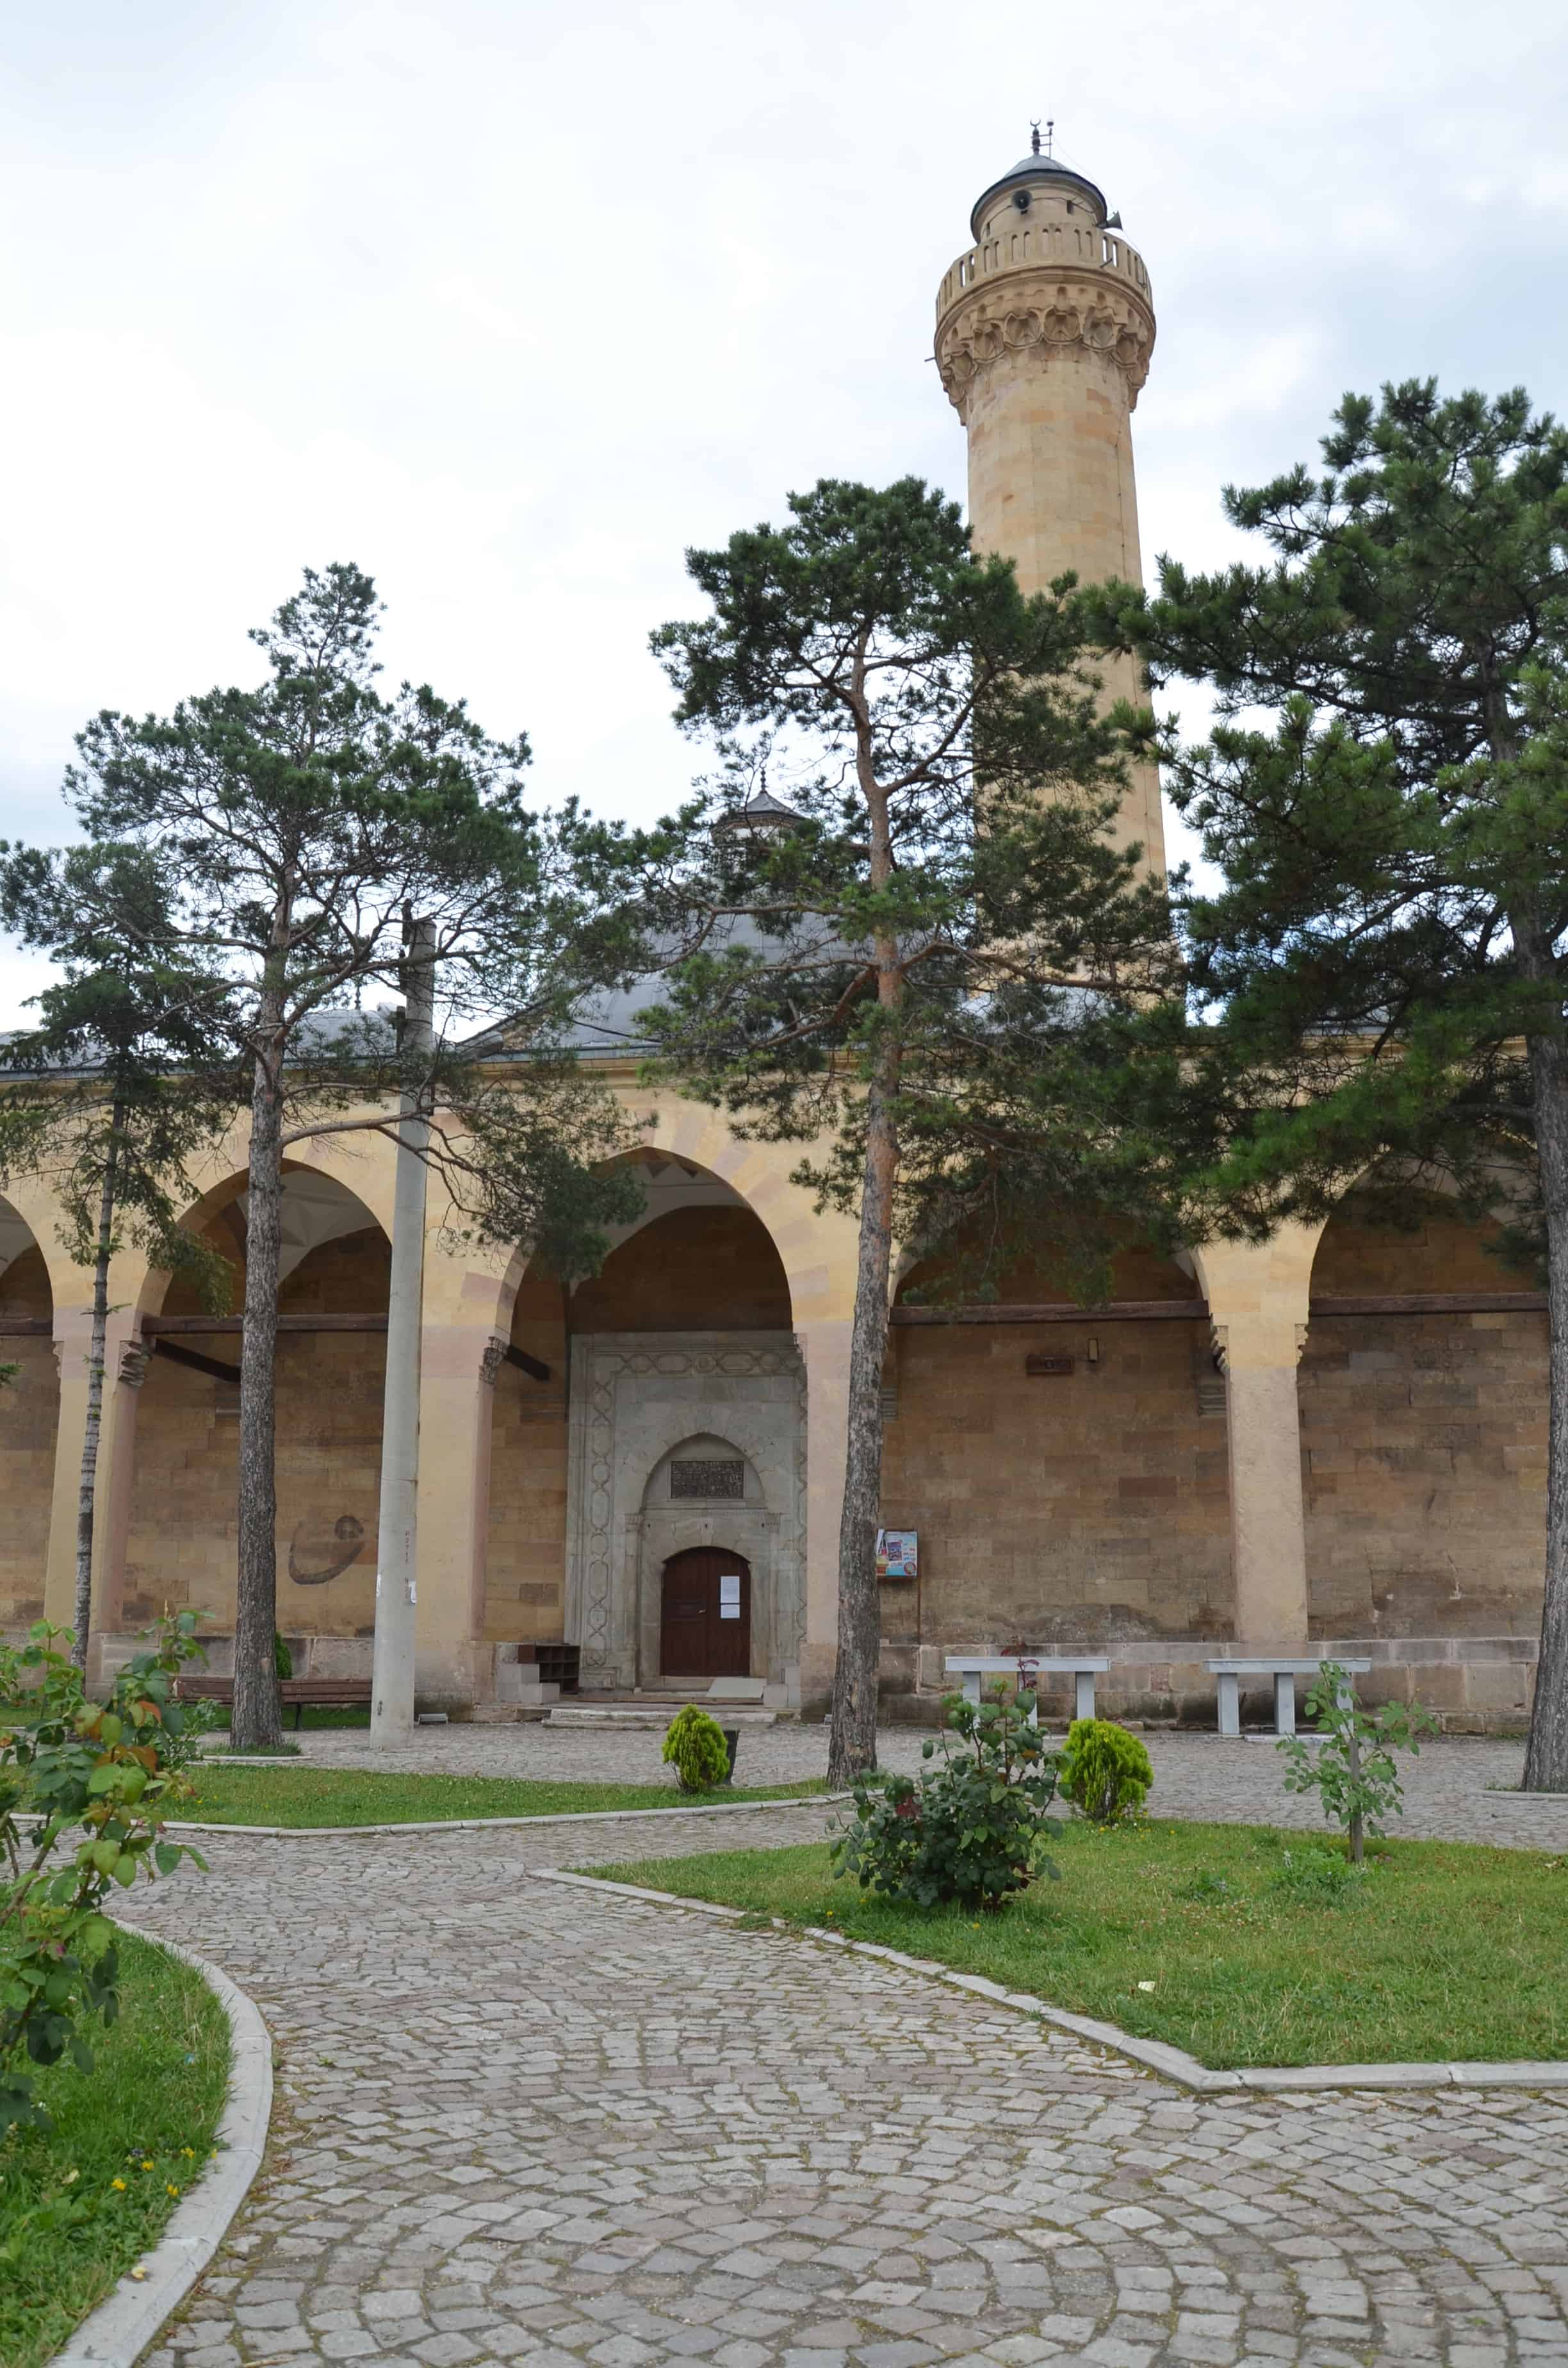 Entrance to the Ismail Bey Mosque